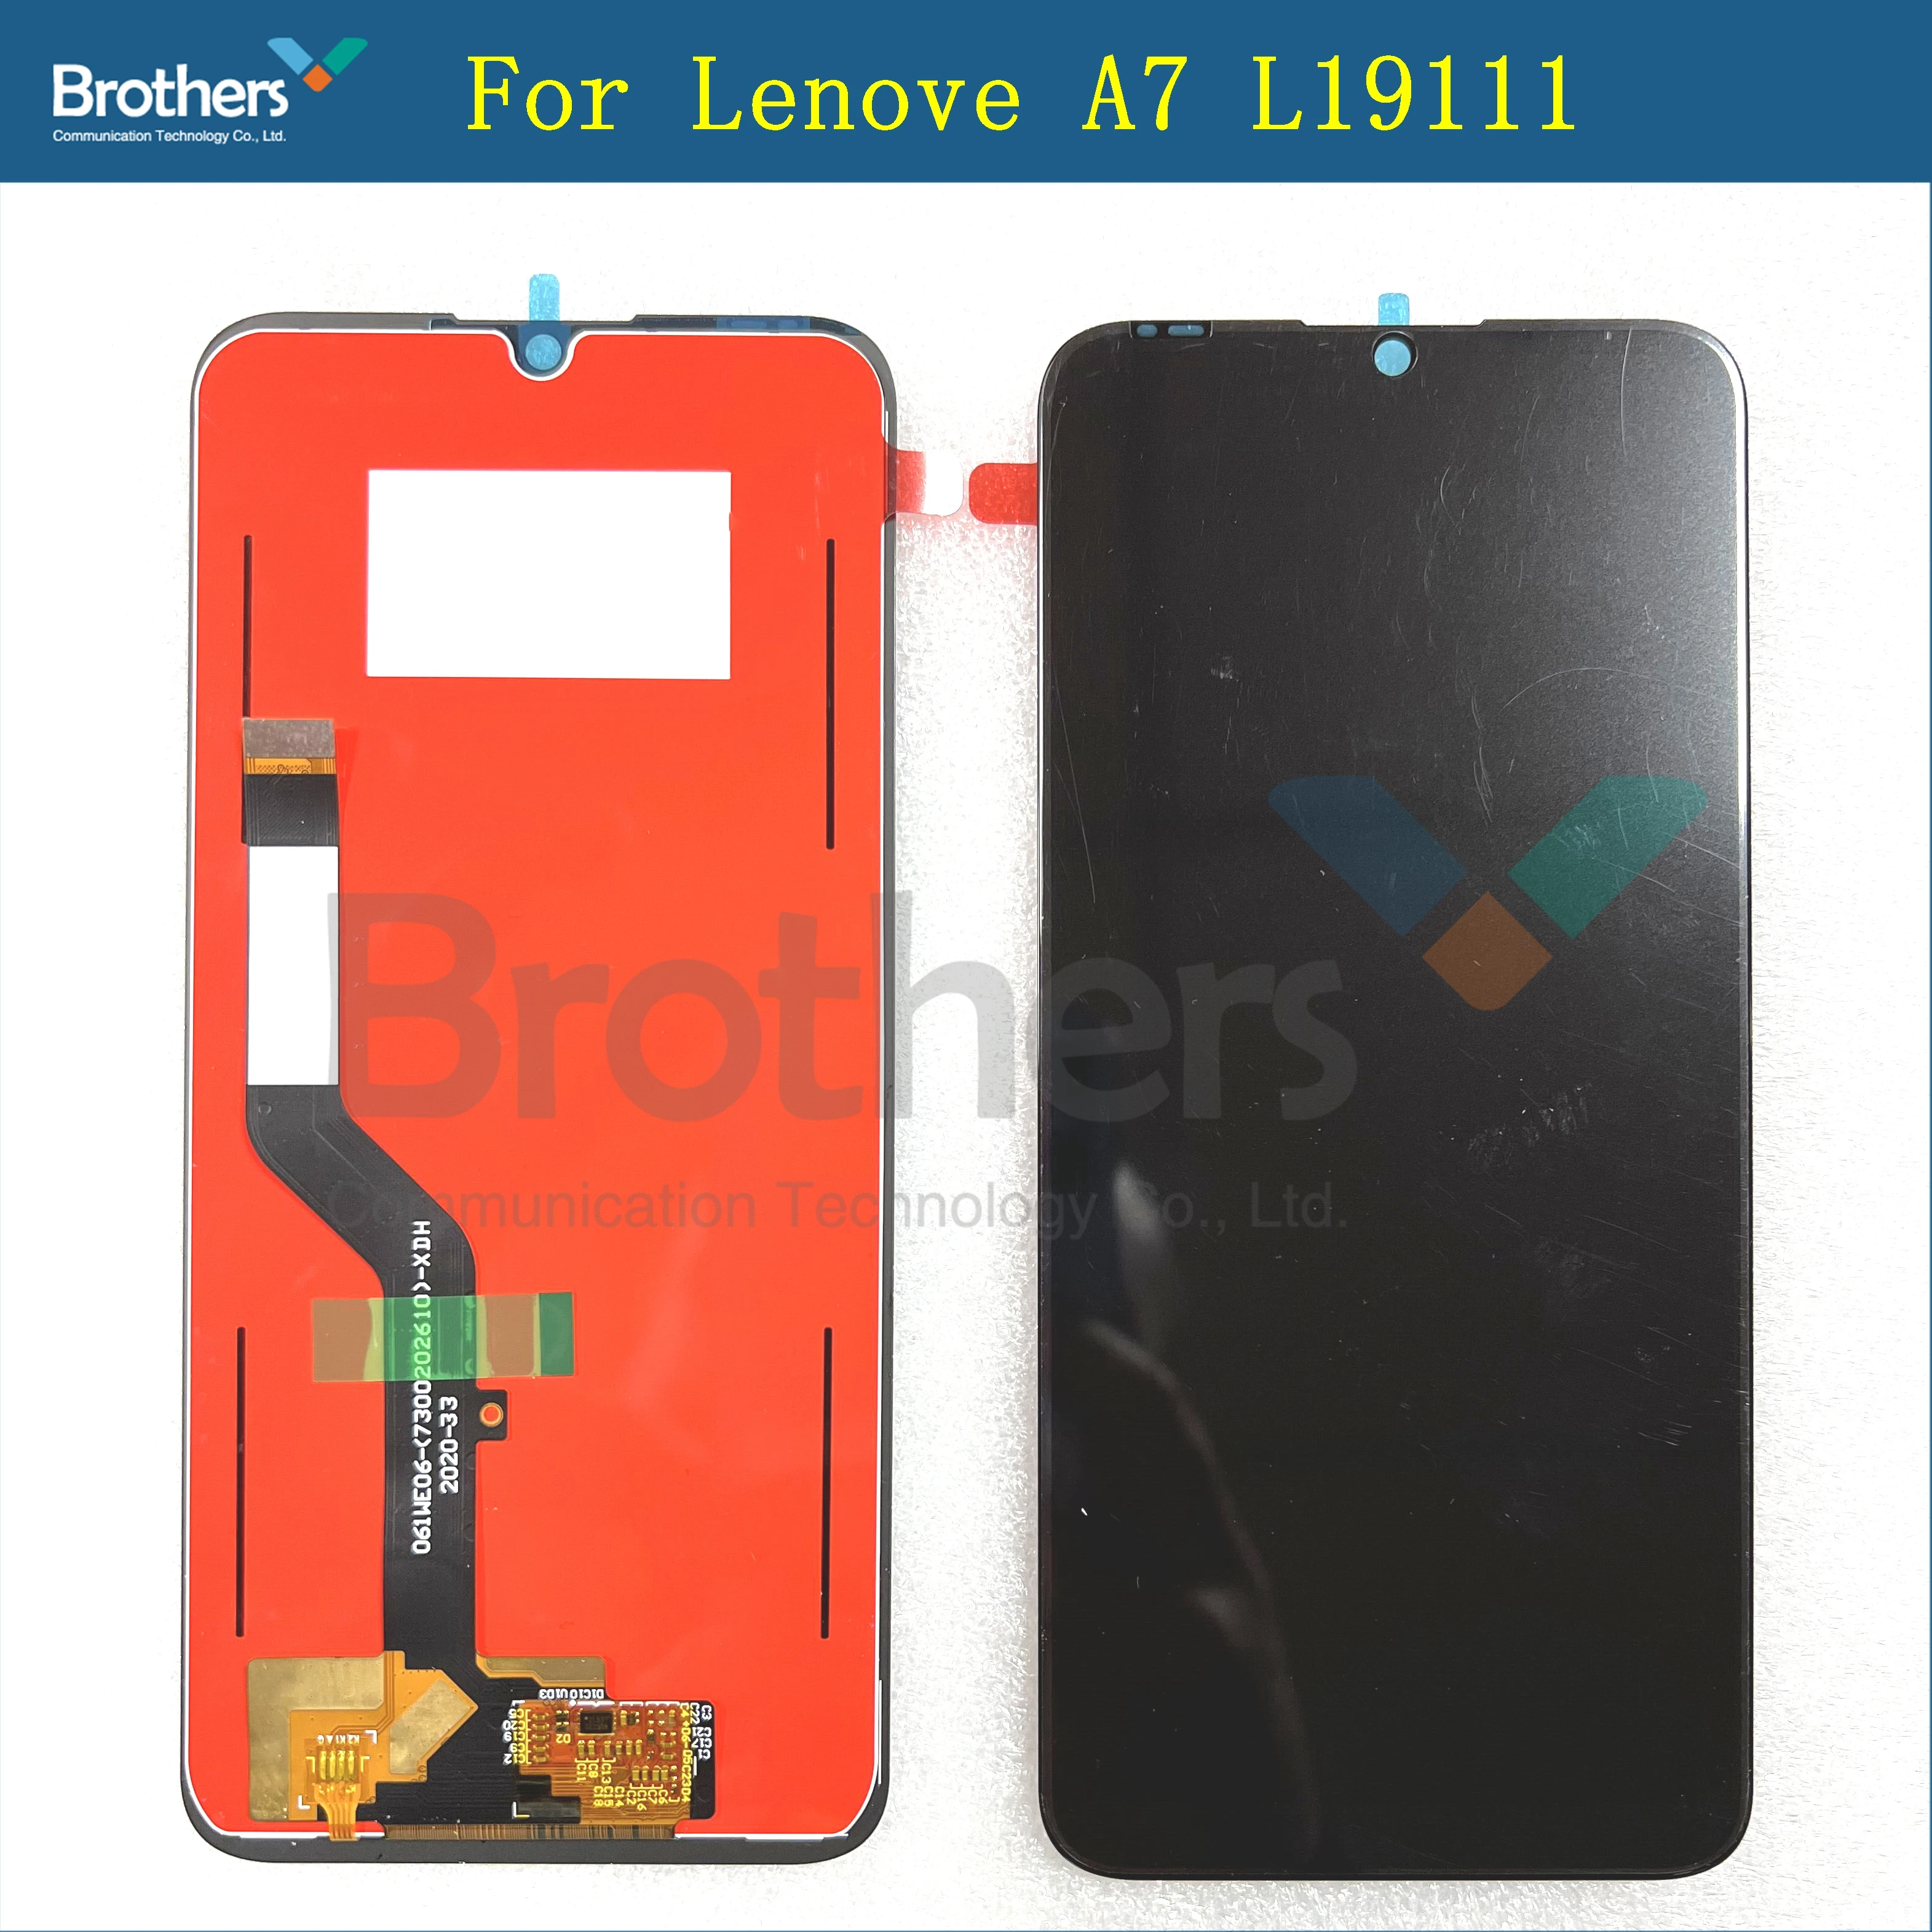 screen for lcd phones galaxy 6.09'' 100% Tested LCD For Lenovo A7 Display Touch Screen Digitizer Assembly For Lenovo A7 or L19111 LCD Display the best screen for lcd phones android